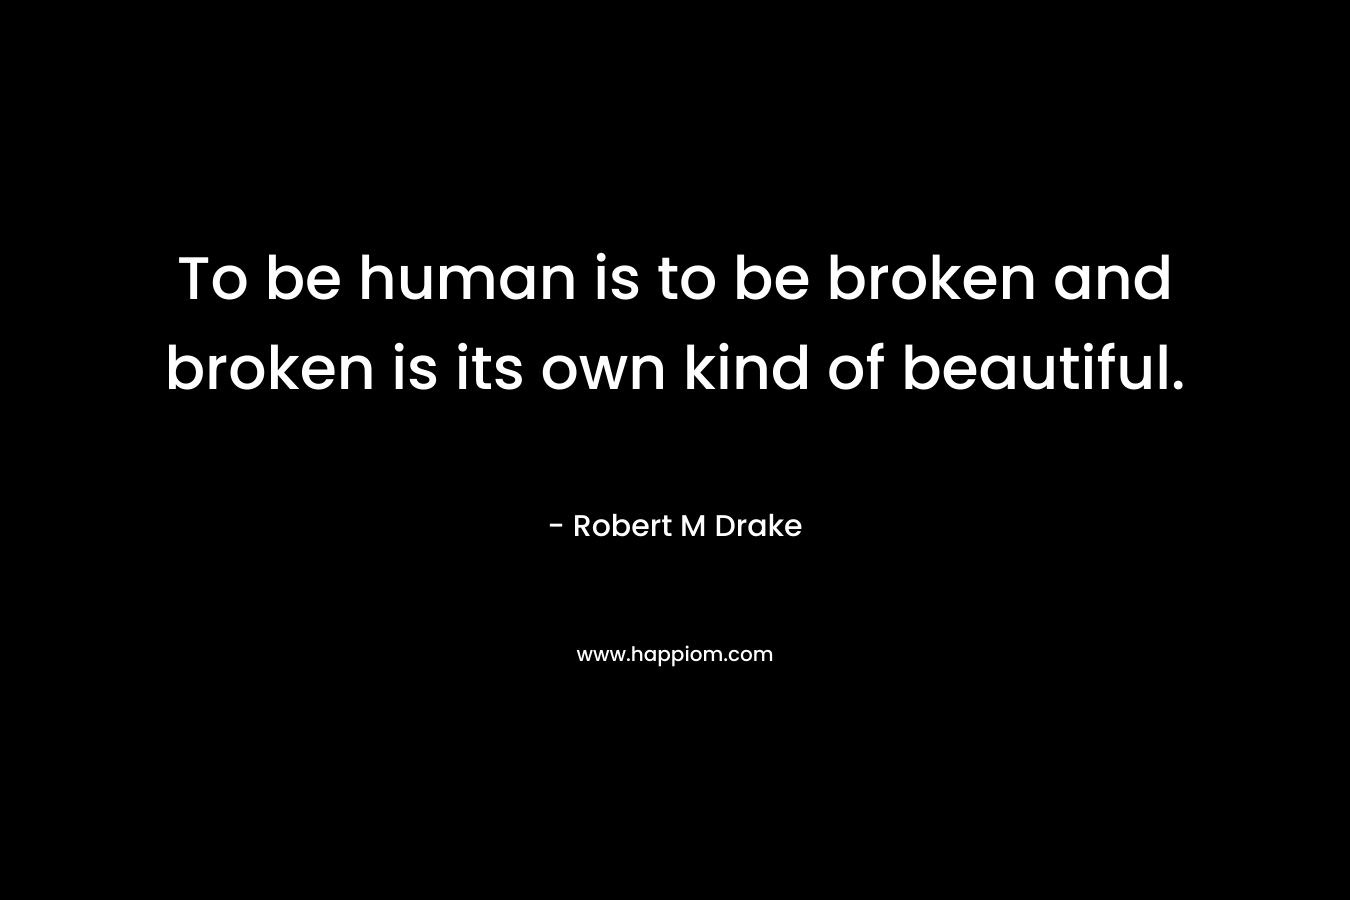 To be human is to be broken and broken is its own kind of beautiful.